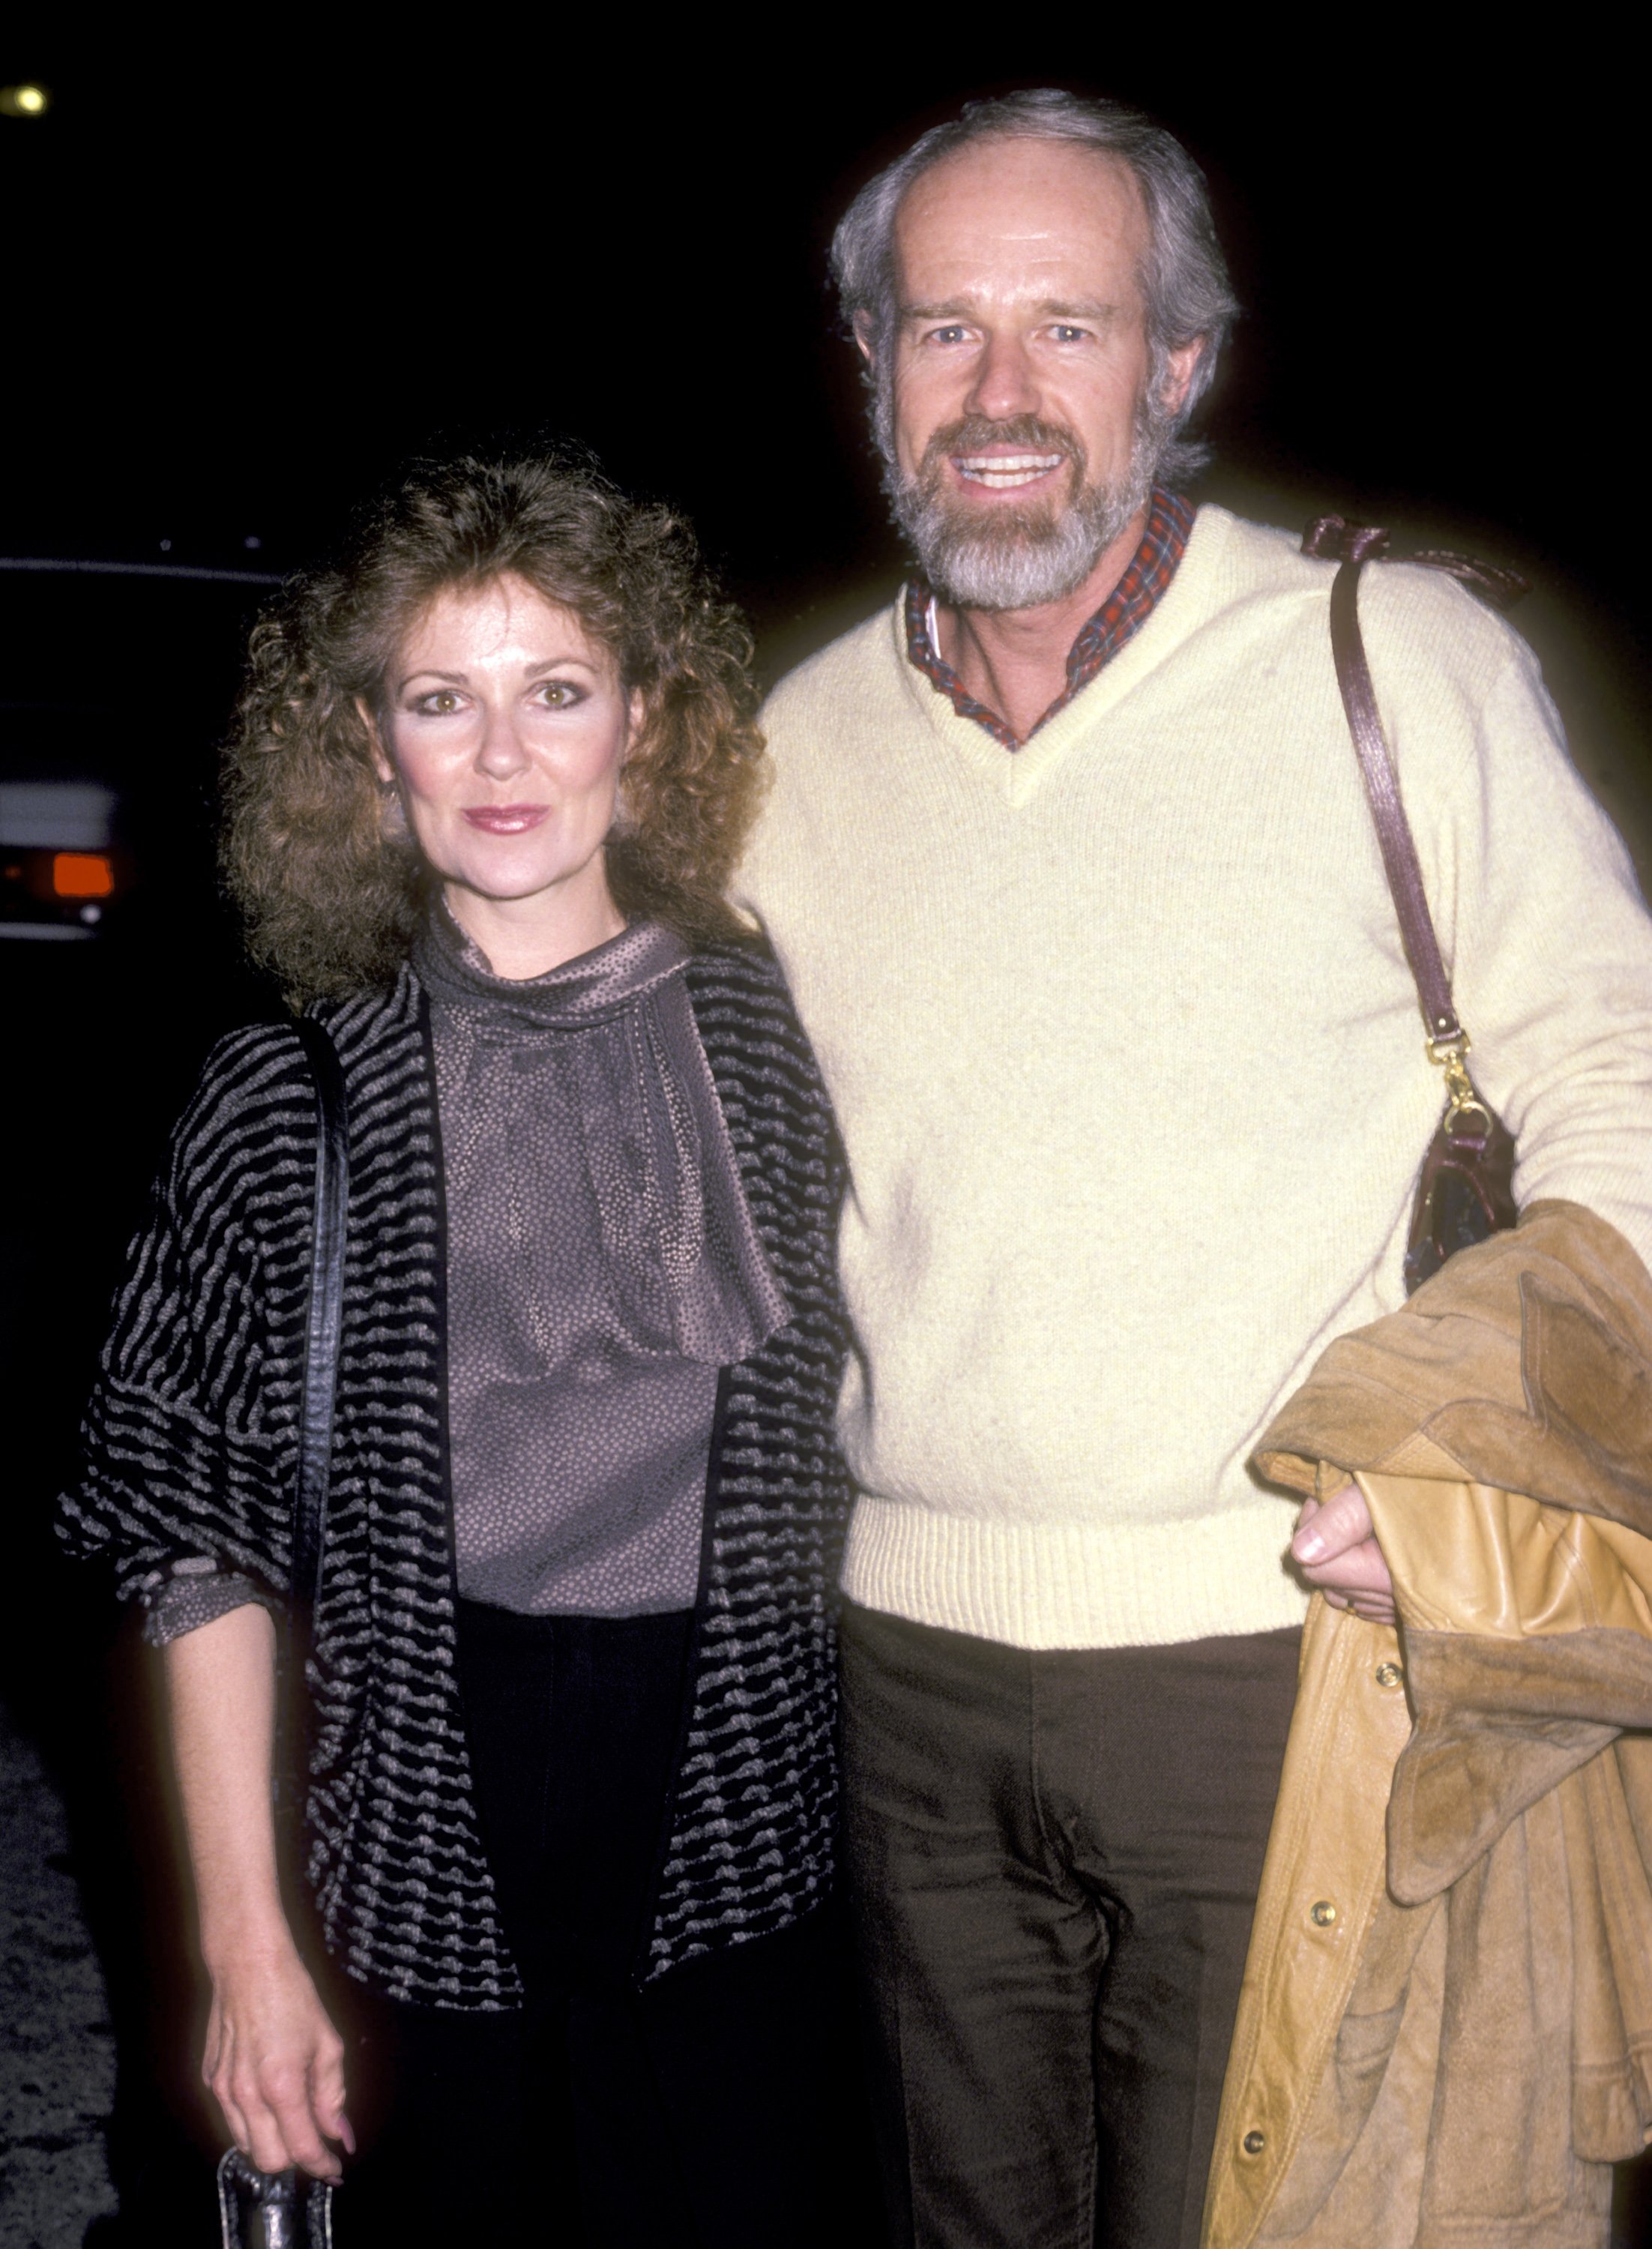 Shelley Fabares and Mike Farrell attend the Fundraiser Benefit for Senator Christopher Dodd at Bayshore Bowling Alley on December 5, 1985 in Los Angeles, California. | Source: Getty Images